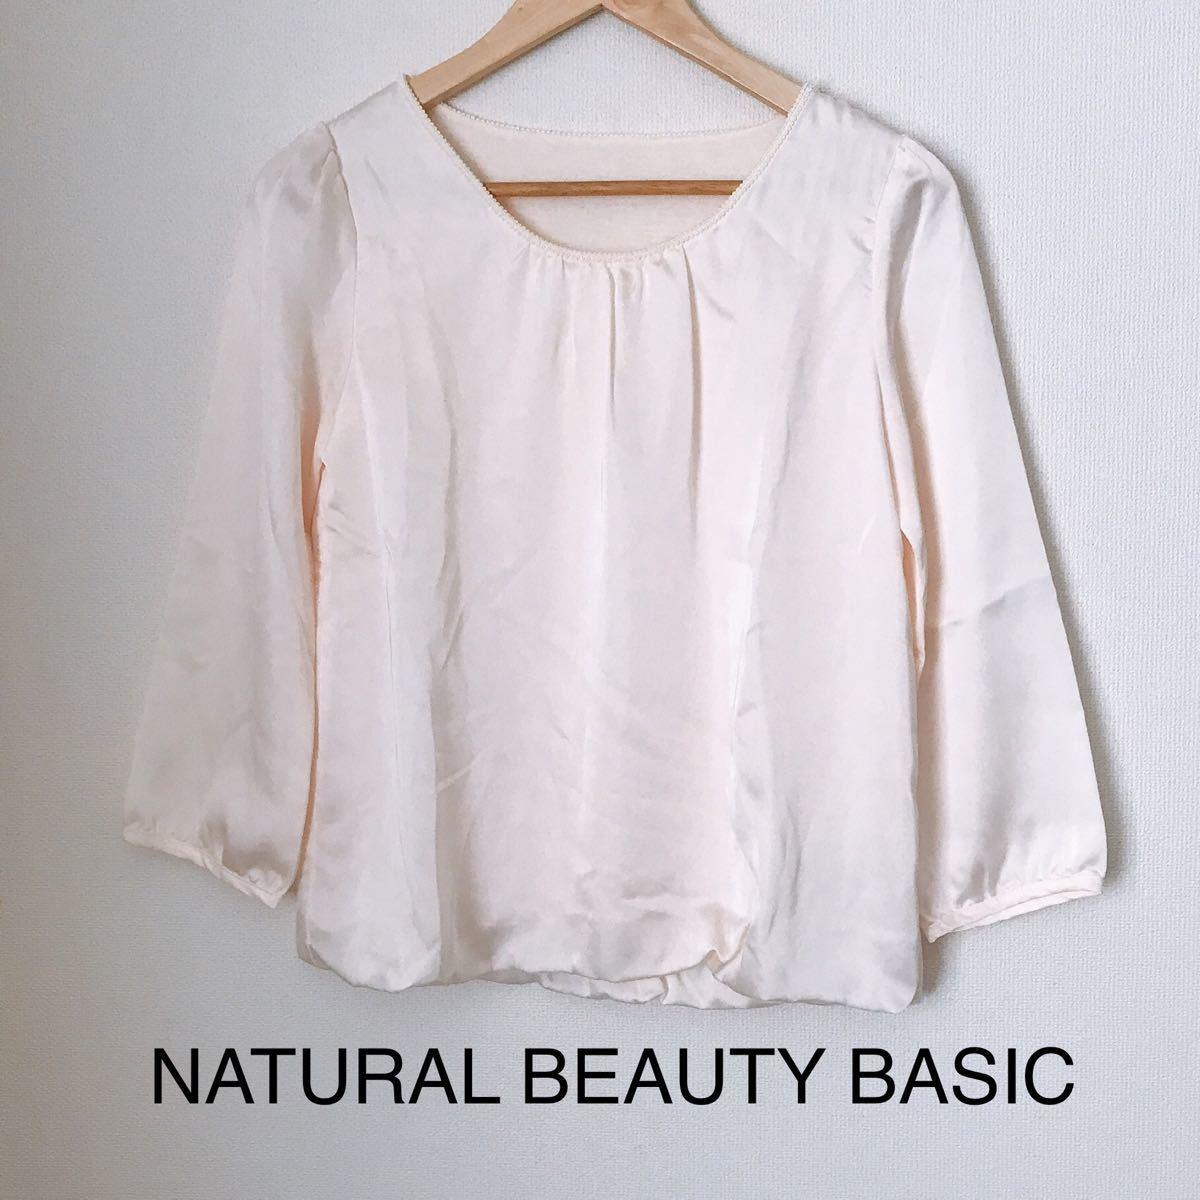 【NATURAL BEAUTY BASIC】 ブラウス　パールピンク